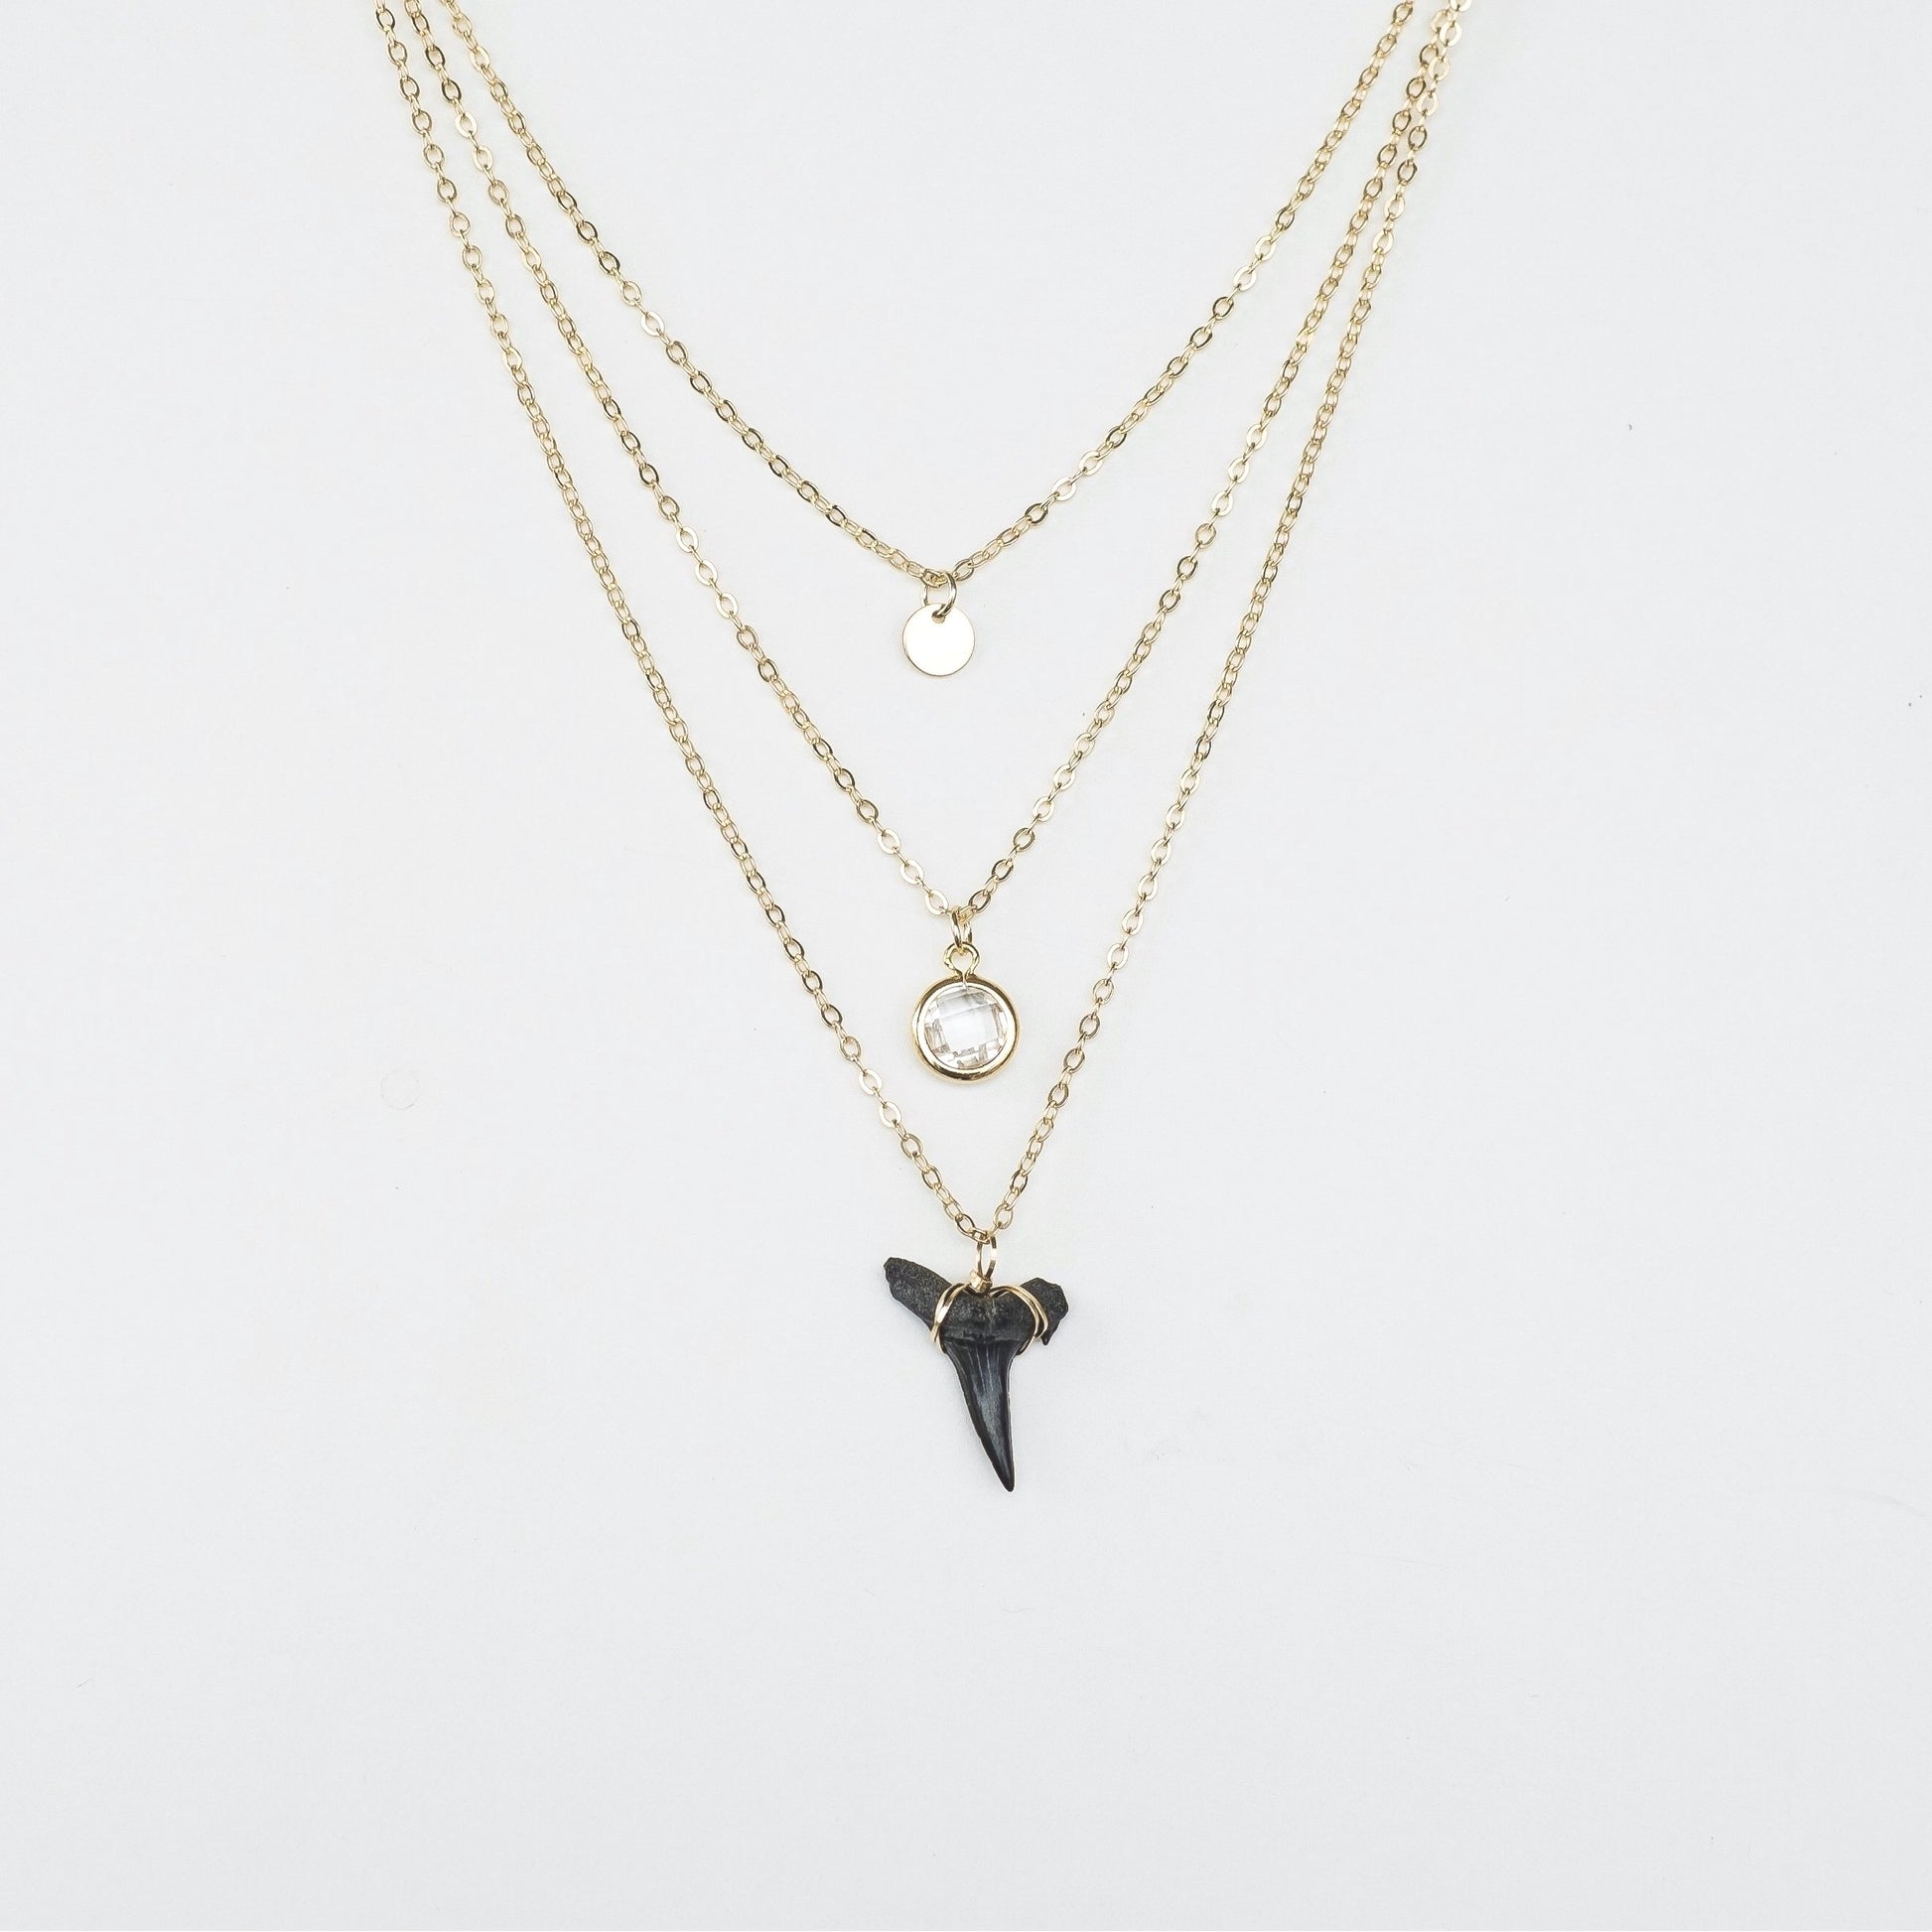 real shark tooth dainty layering necklace - natural shark tooth fossil from prehistoric sand tiger shark; elegant triple layer shark tooth necklace